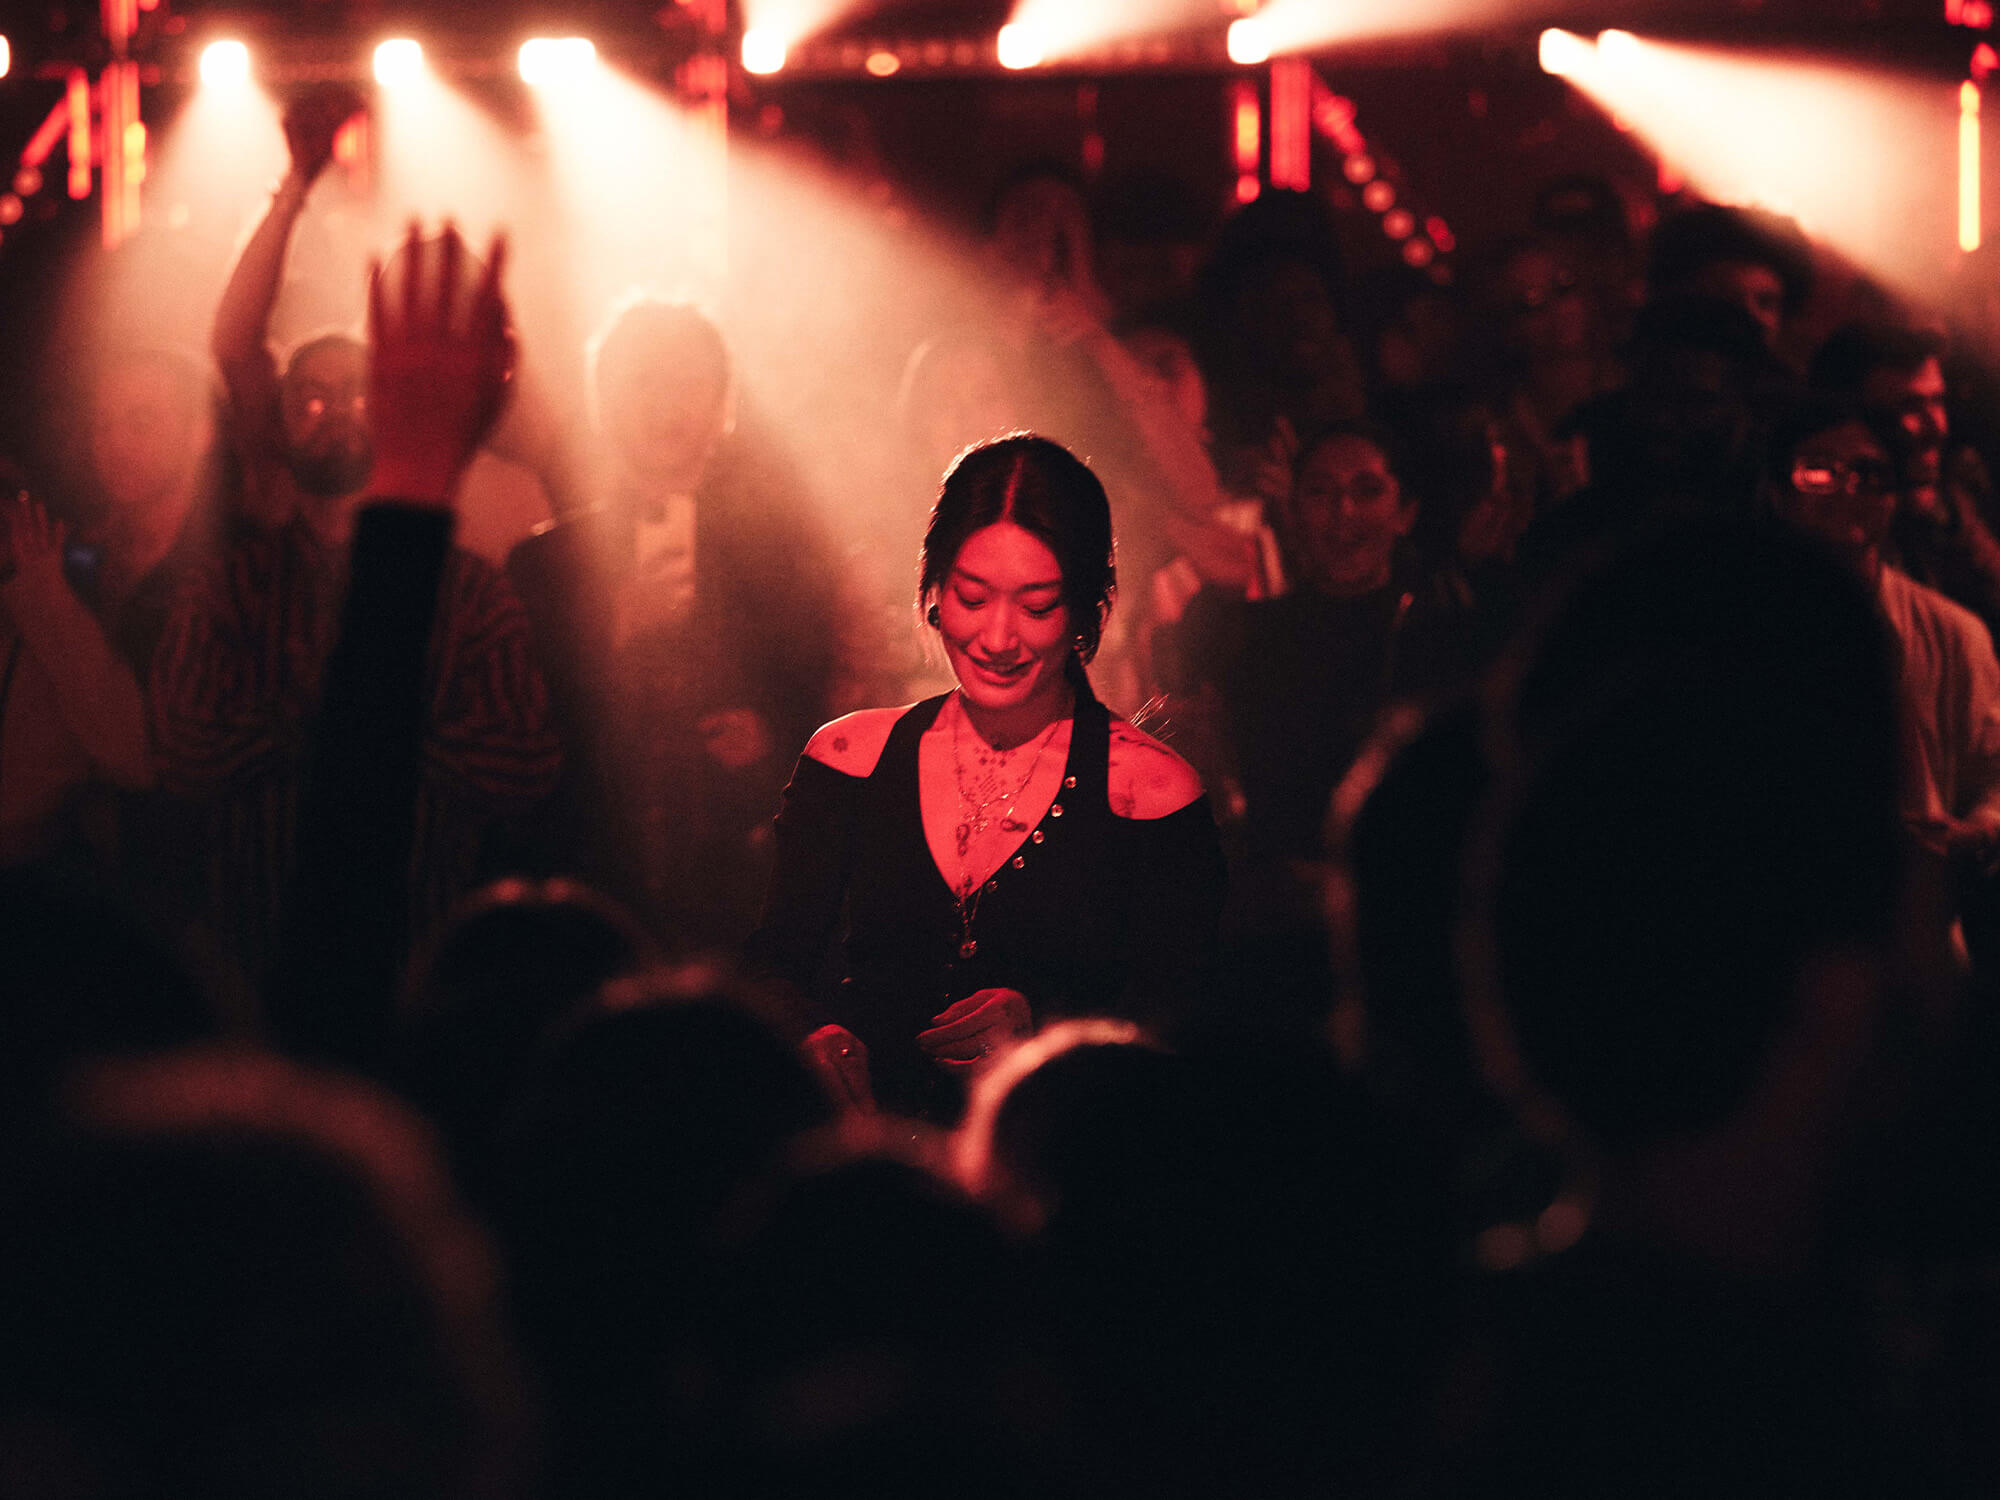 Peggy Gou behind the decks at the event. She is lit up by red lighting and is surrounded by a large crowd who have their arms up in the air.